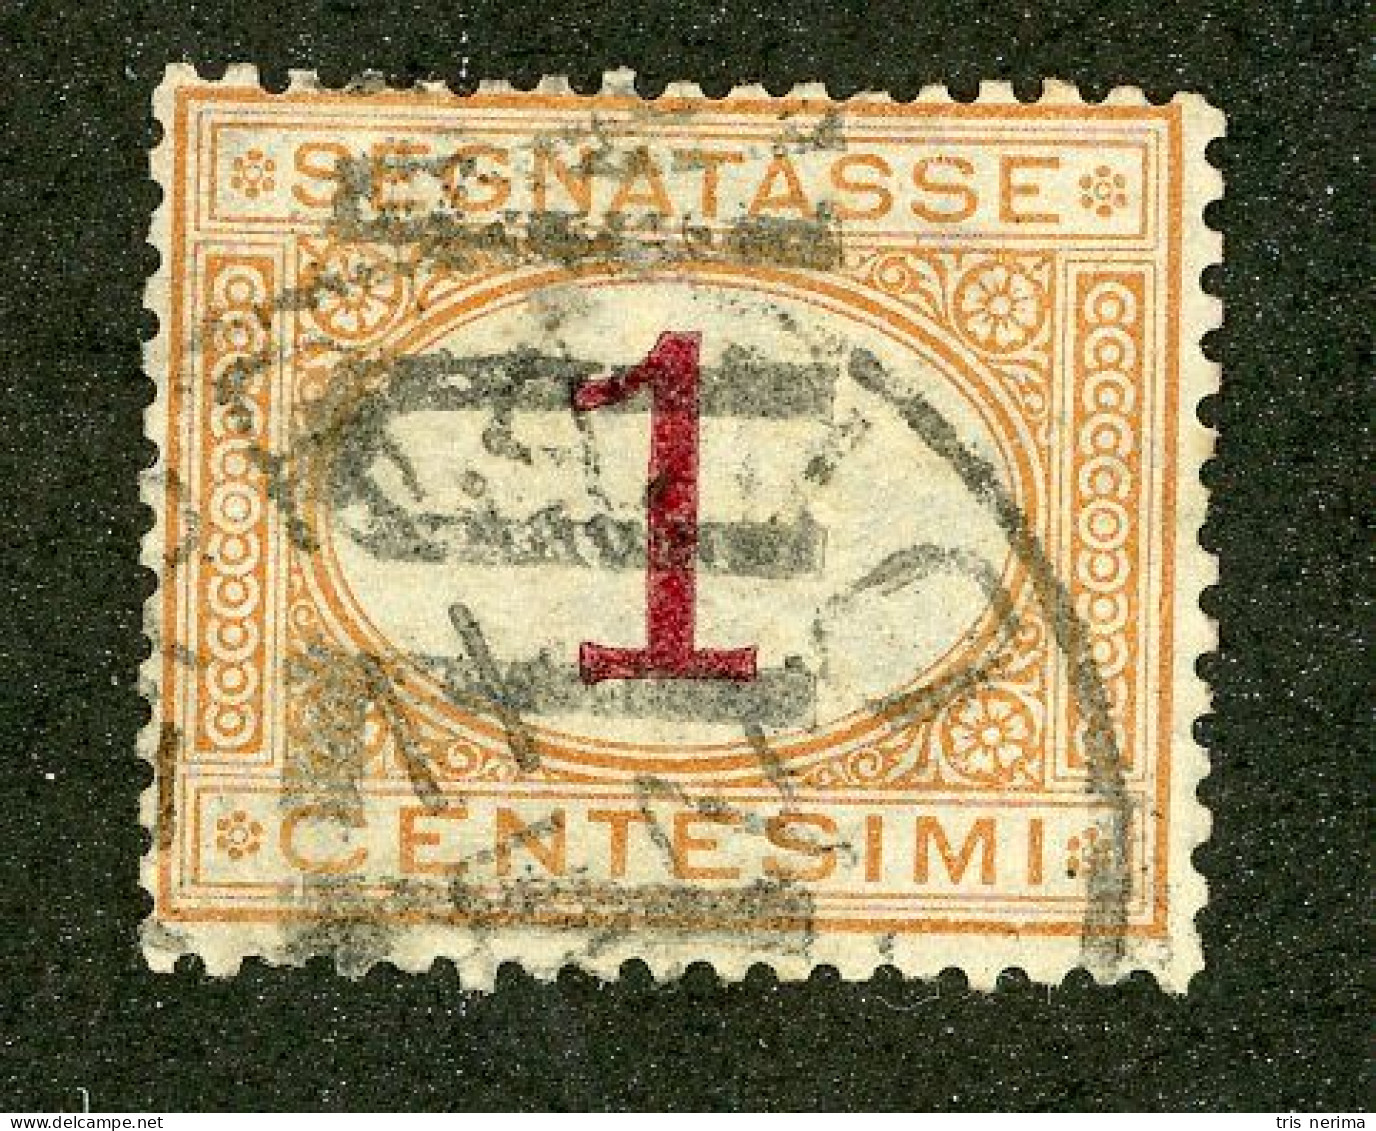 1042 Italy 1870 Scott #J3 Used (Lower Bids 20% Off) - Postage Due